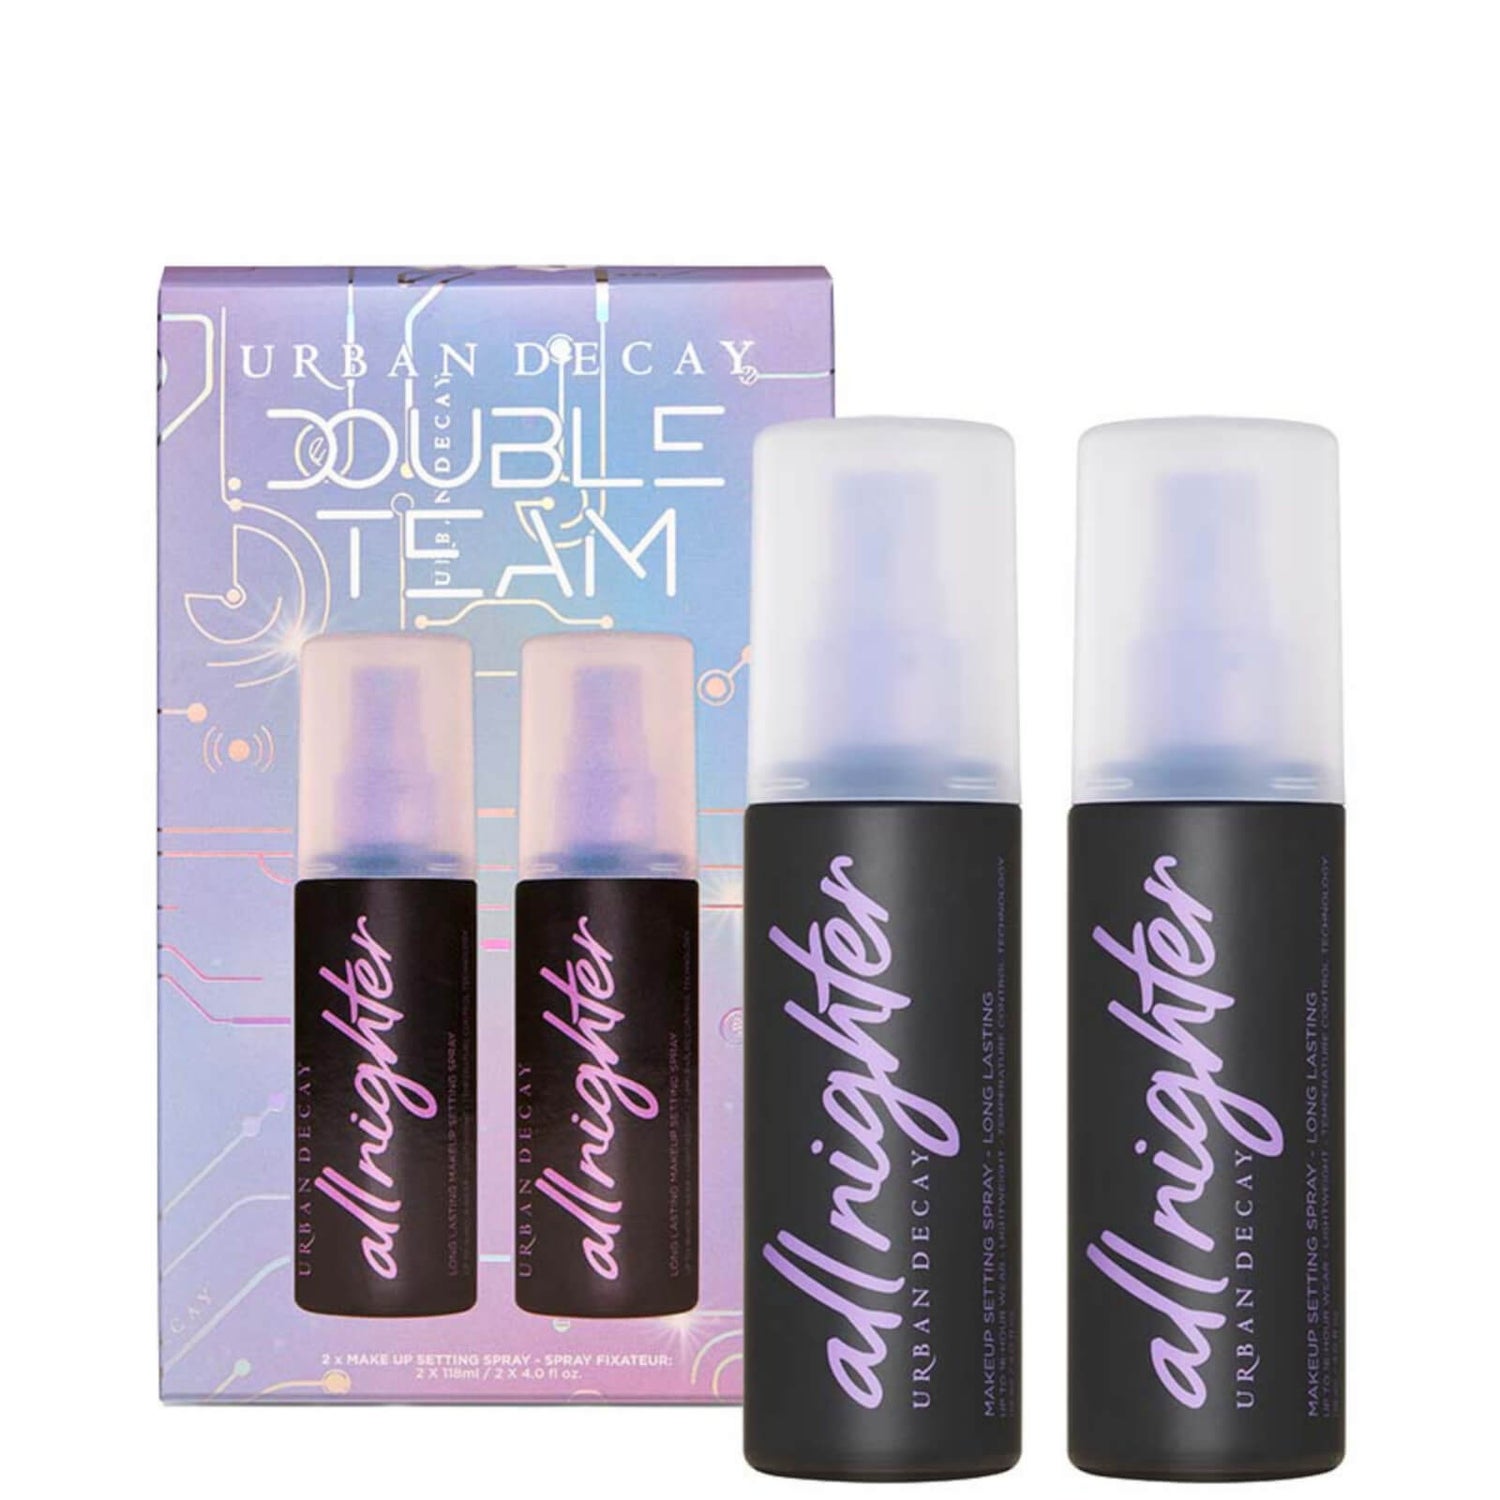 Urban Decay All Nighter Duo Gift Set